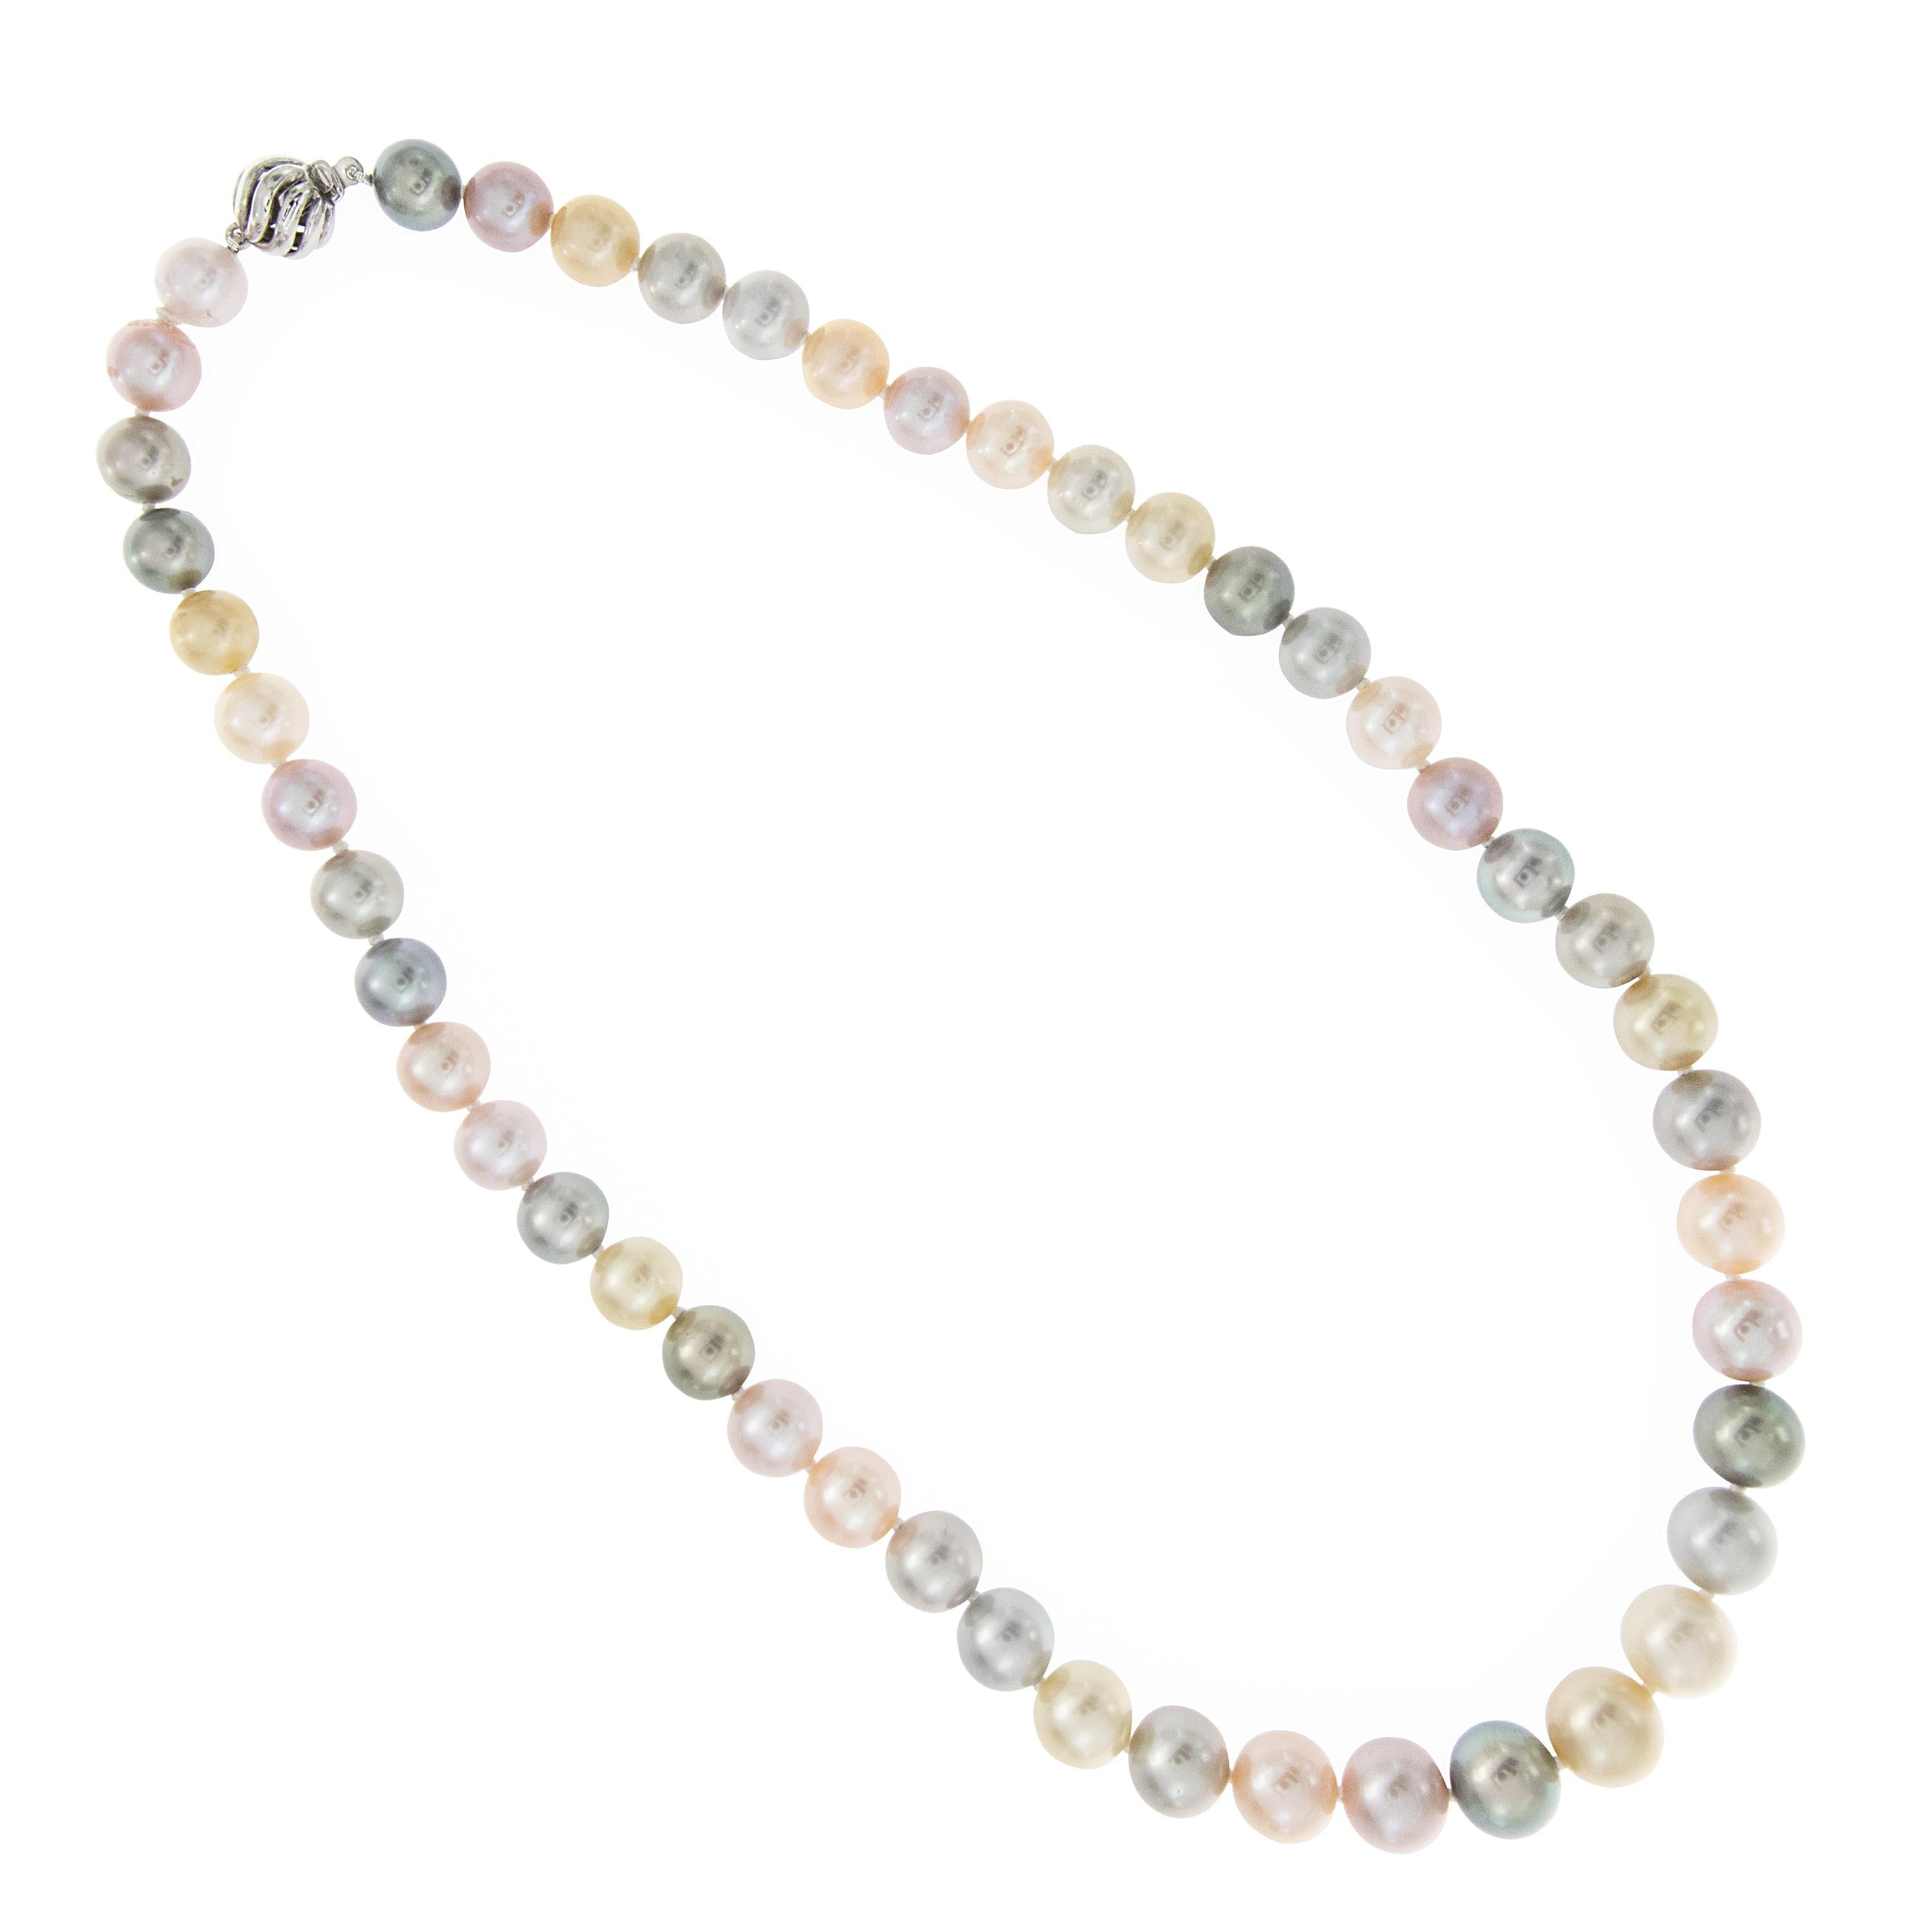 Mixing South Sea pearls with freshwater pearls creates a stunning look for a single strand. This necklace encompasses colorful layers creating a pretty gradient of pastels. Necklace is comprised of 47 pearls, 8 mm - 10 mm. Clasp is 14k white gold.